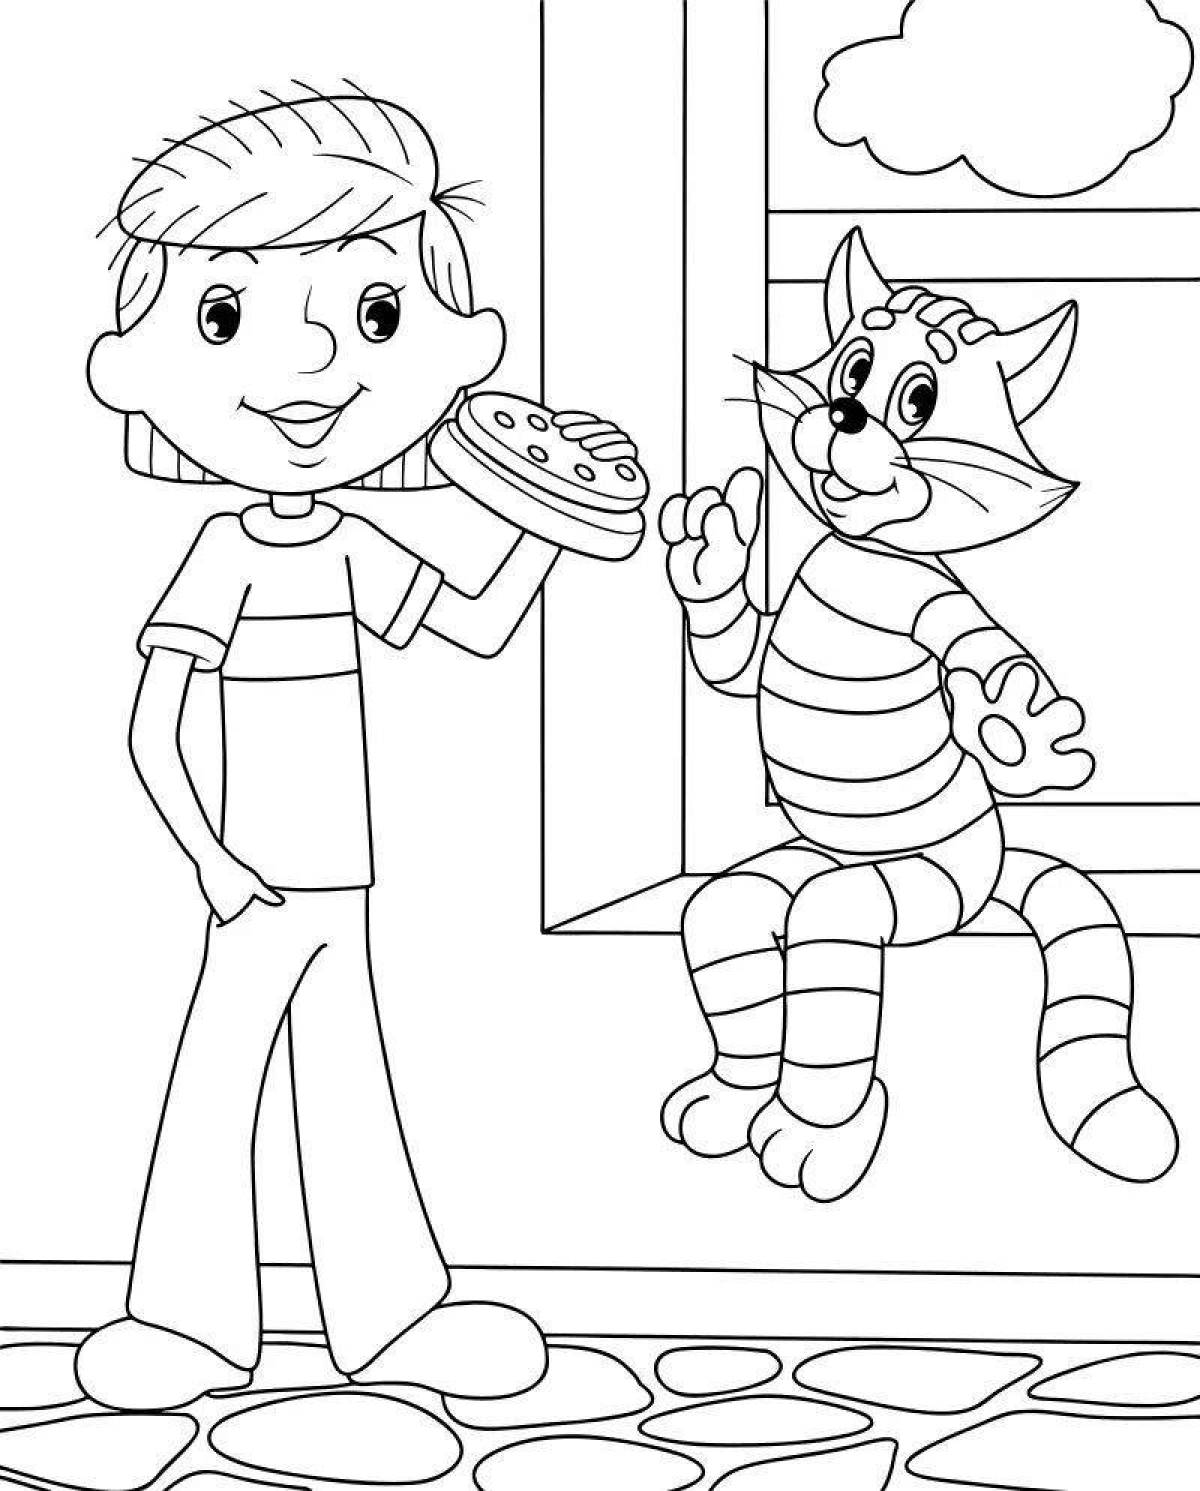 Playful sailor skin coloring page for toddlers